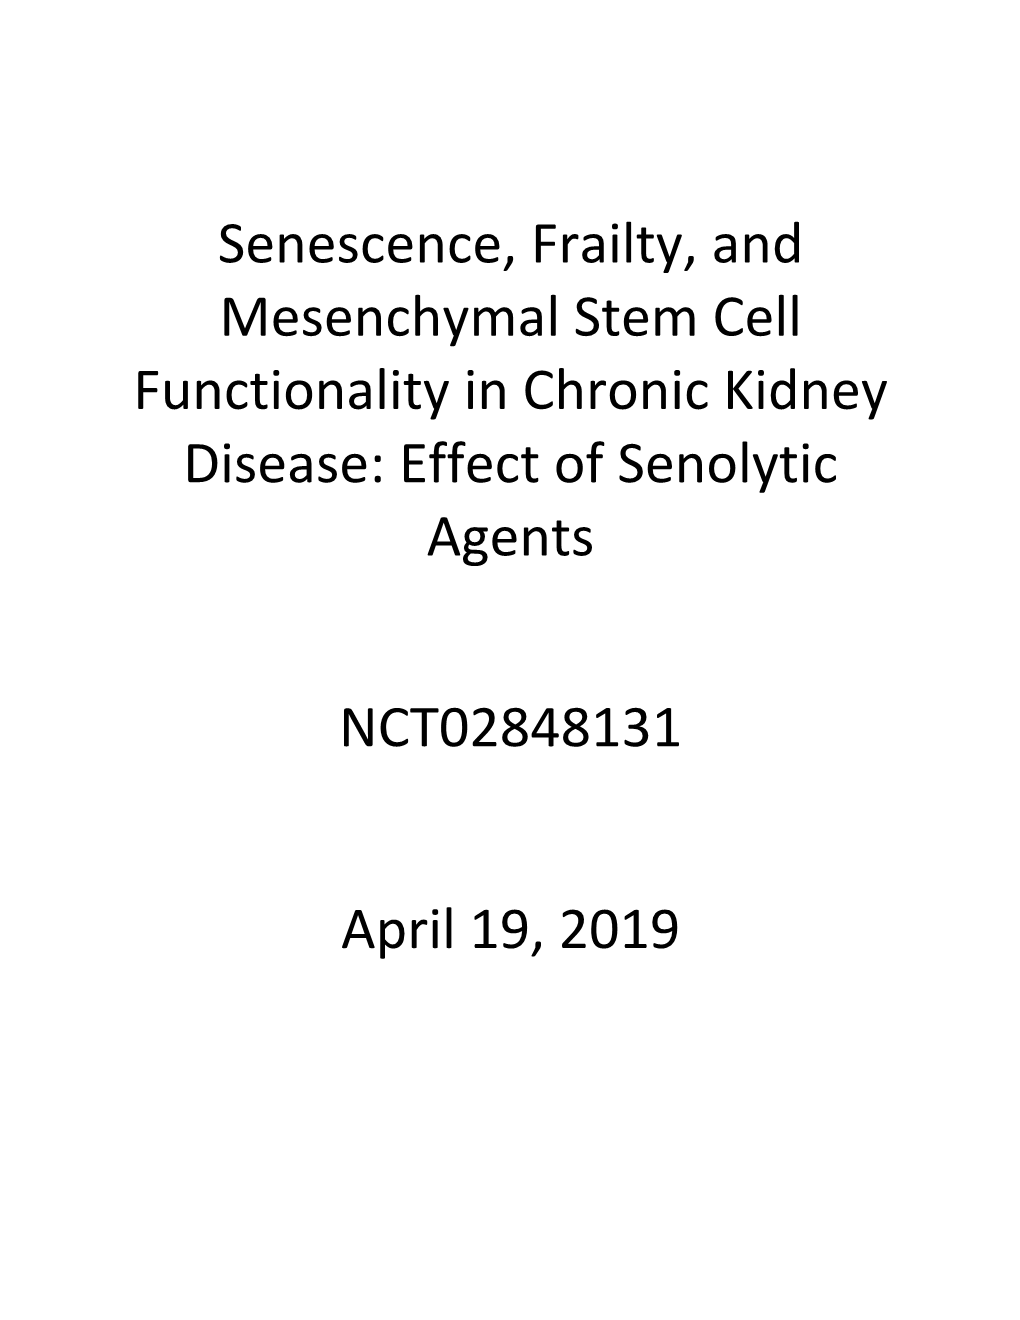 Senescence, Frailty, and Mesenchymal Stem Cell Functionality in Chronic Kidney Disease: Effect of Senolytic Agents